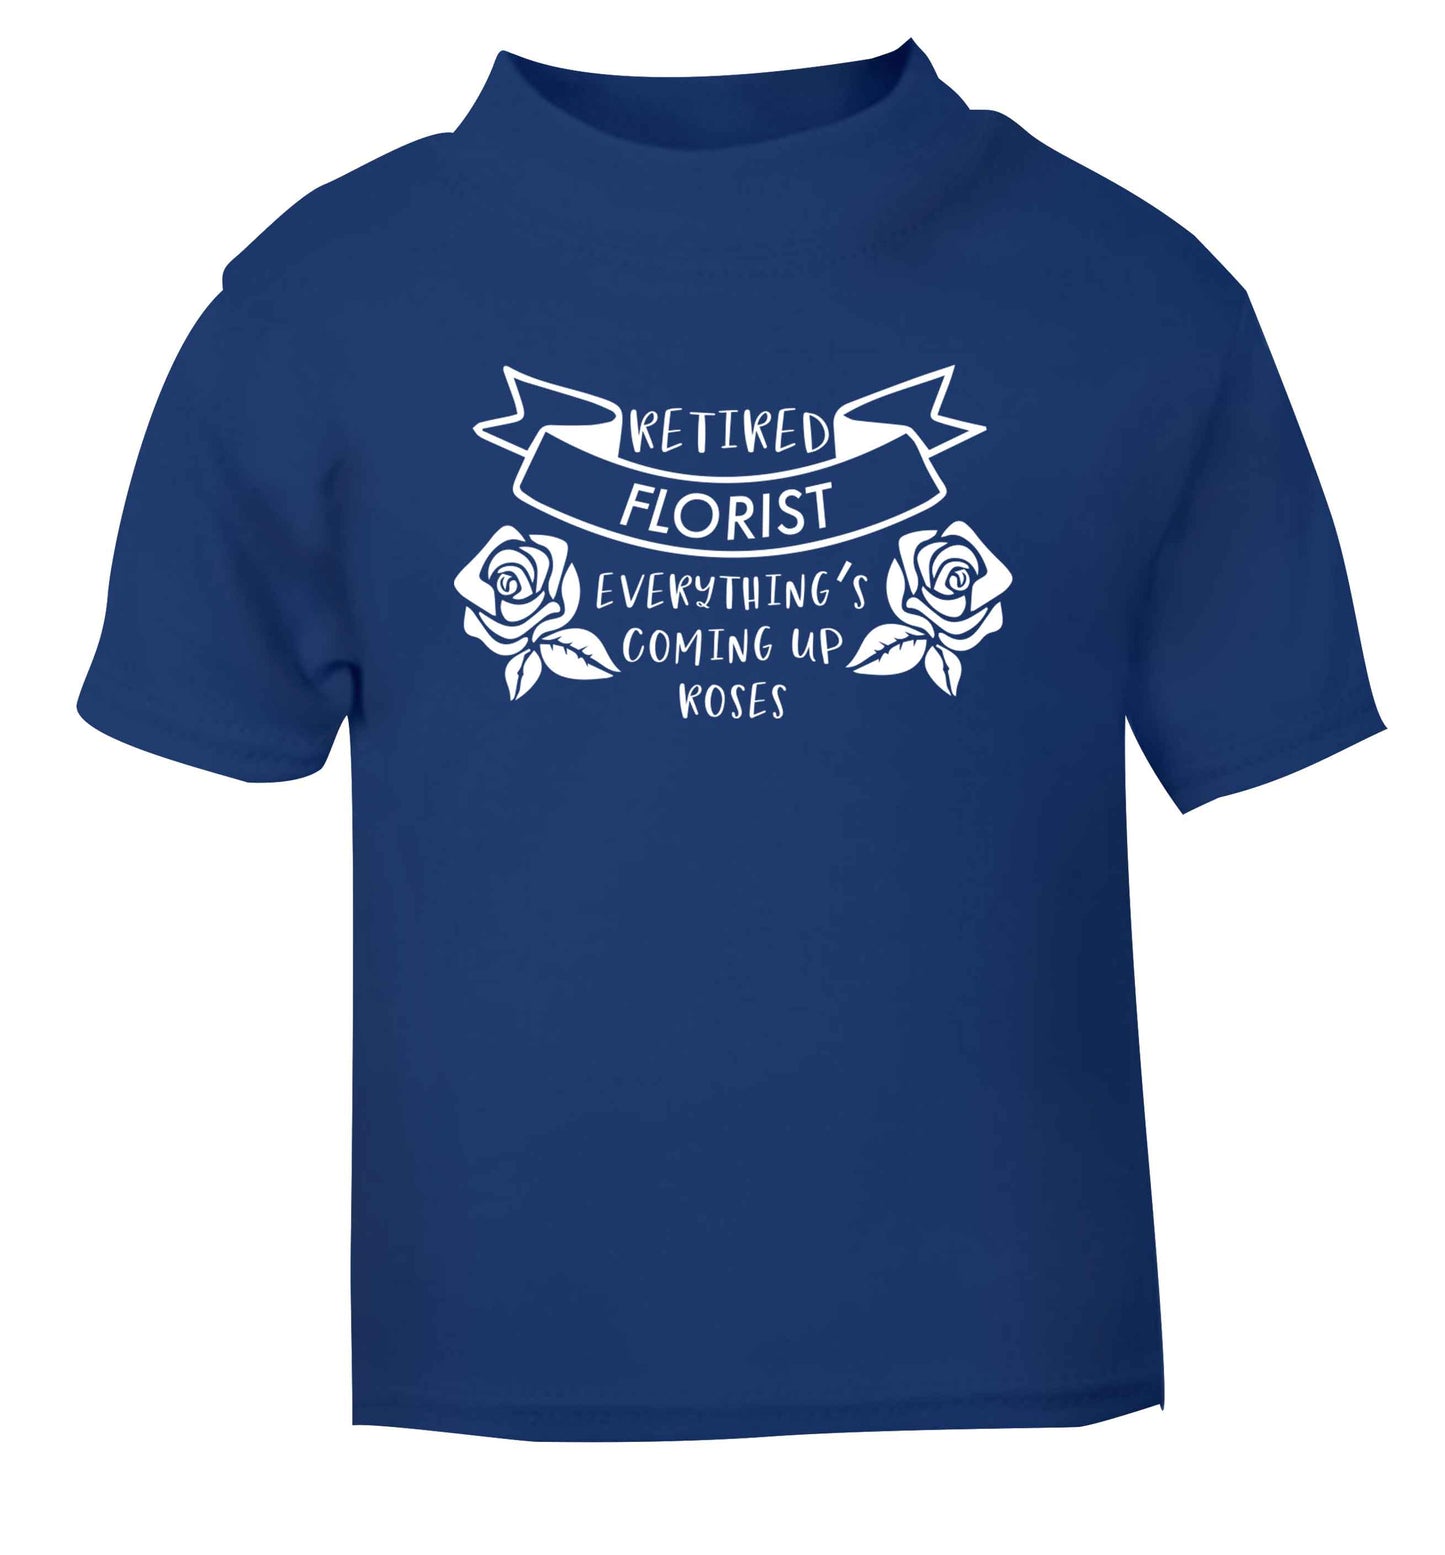 Retired florist everything's coming up roses blue Baby Toddler Tshirt 2 Years